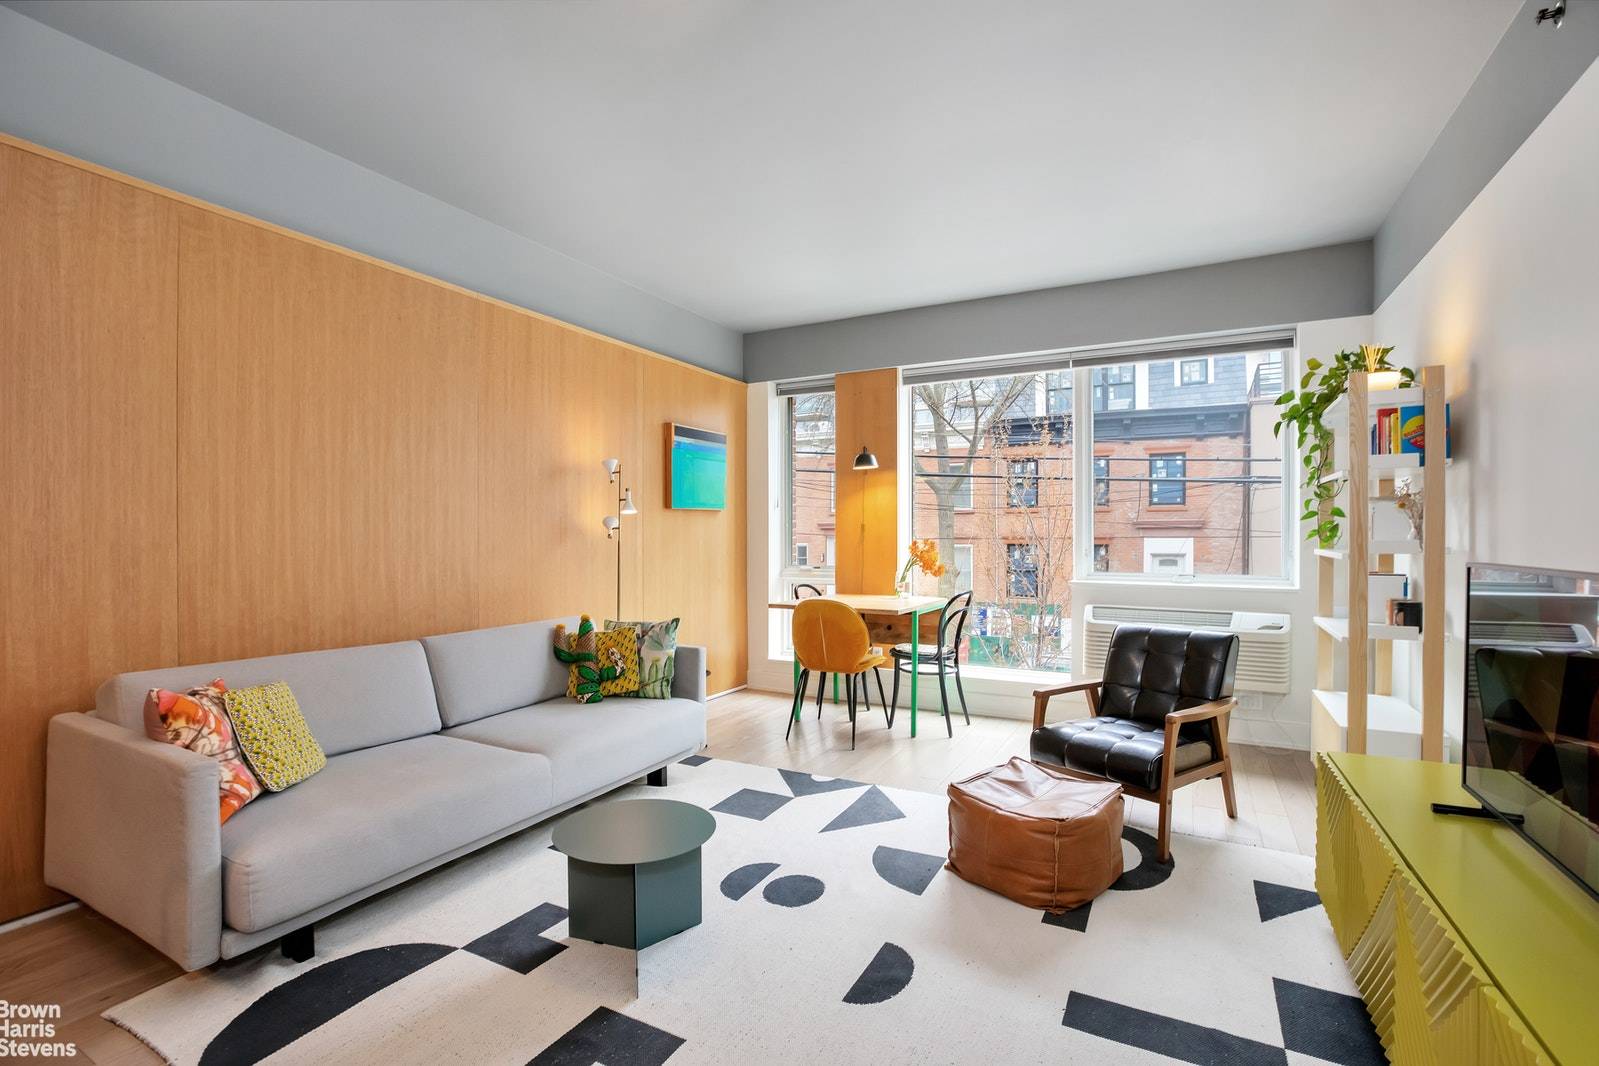 This beautifully designed luxury condo unit is fully furnished and available for rent in the heart of one of NYC's most sought after neighborhoods, Long Island City !